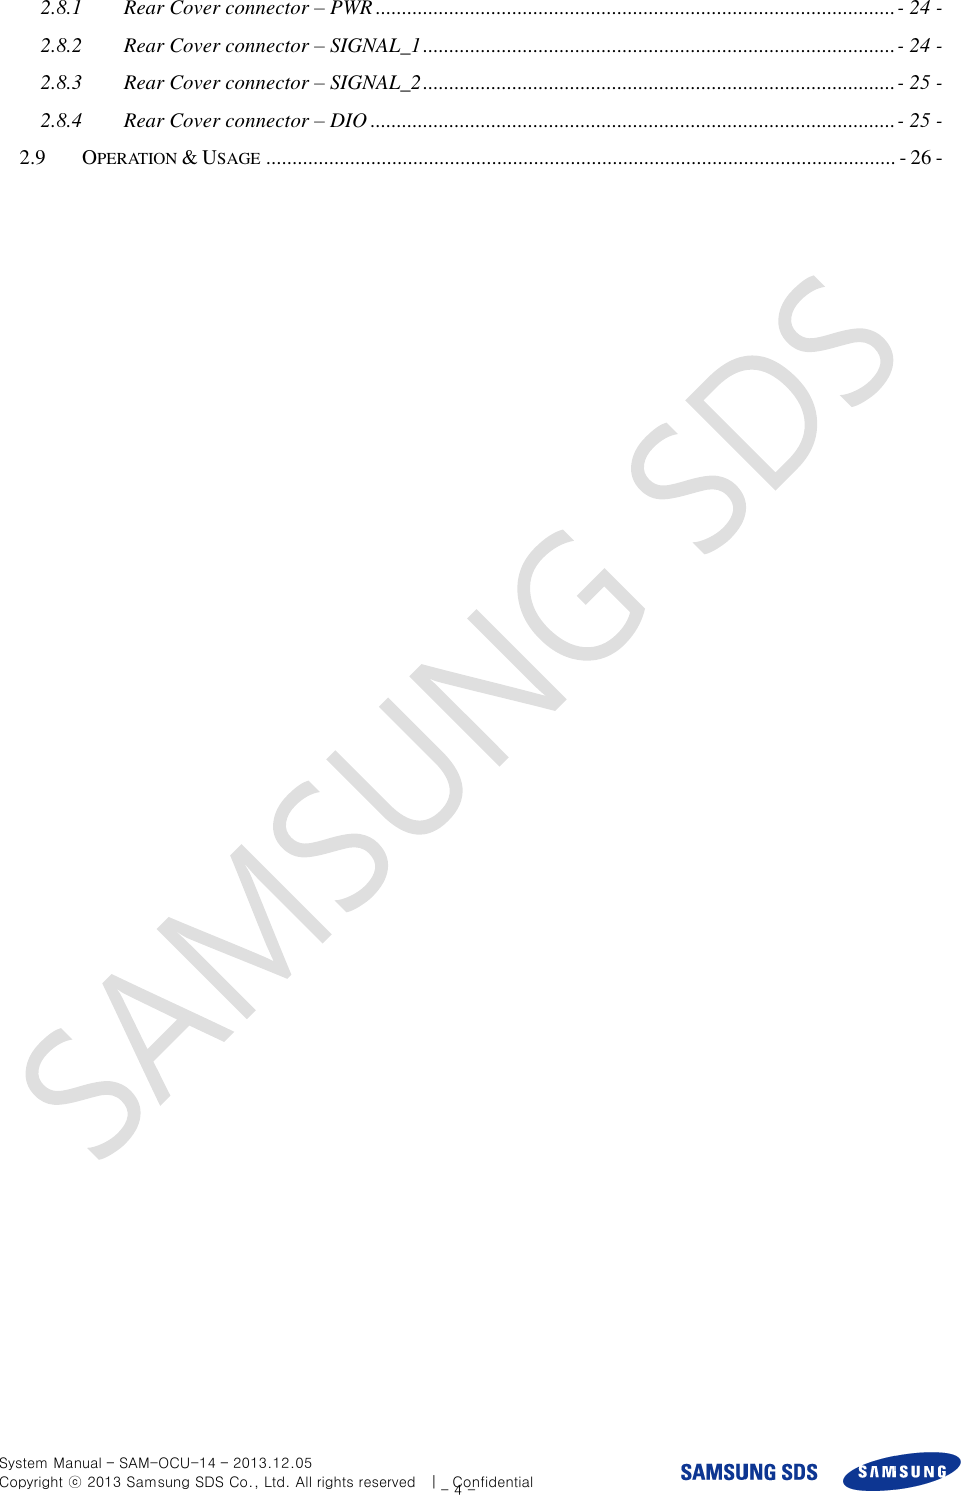  System Manual – SAM-OCU-14 – 2013.12.05 Copyright ⓒ 2013 Samsung SDS Co., Ltd. All rights reserved    |    Confidential - 4 - 2.8.1 Rear Cover connector – PWR ................................................................................................... - 24 - 2.8.2 Rear Cover connector – SIGNAL_1 .......................................................................................... - 24 - 2.8.3 Rear Cover connector – SIGNAL_2 .......................................................................................... - 25 - 2.8.4 Rear Cover connector – DIO .................................................................................................... - 25 - 2.9 OPERATION &amp; USAGE ........................................................................................................................ - 26 -  